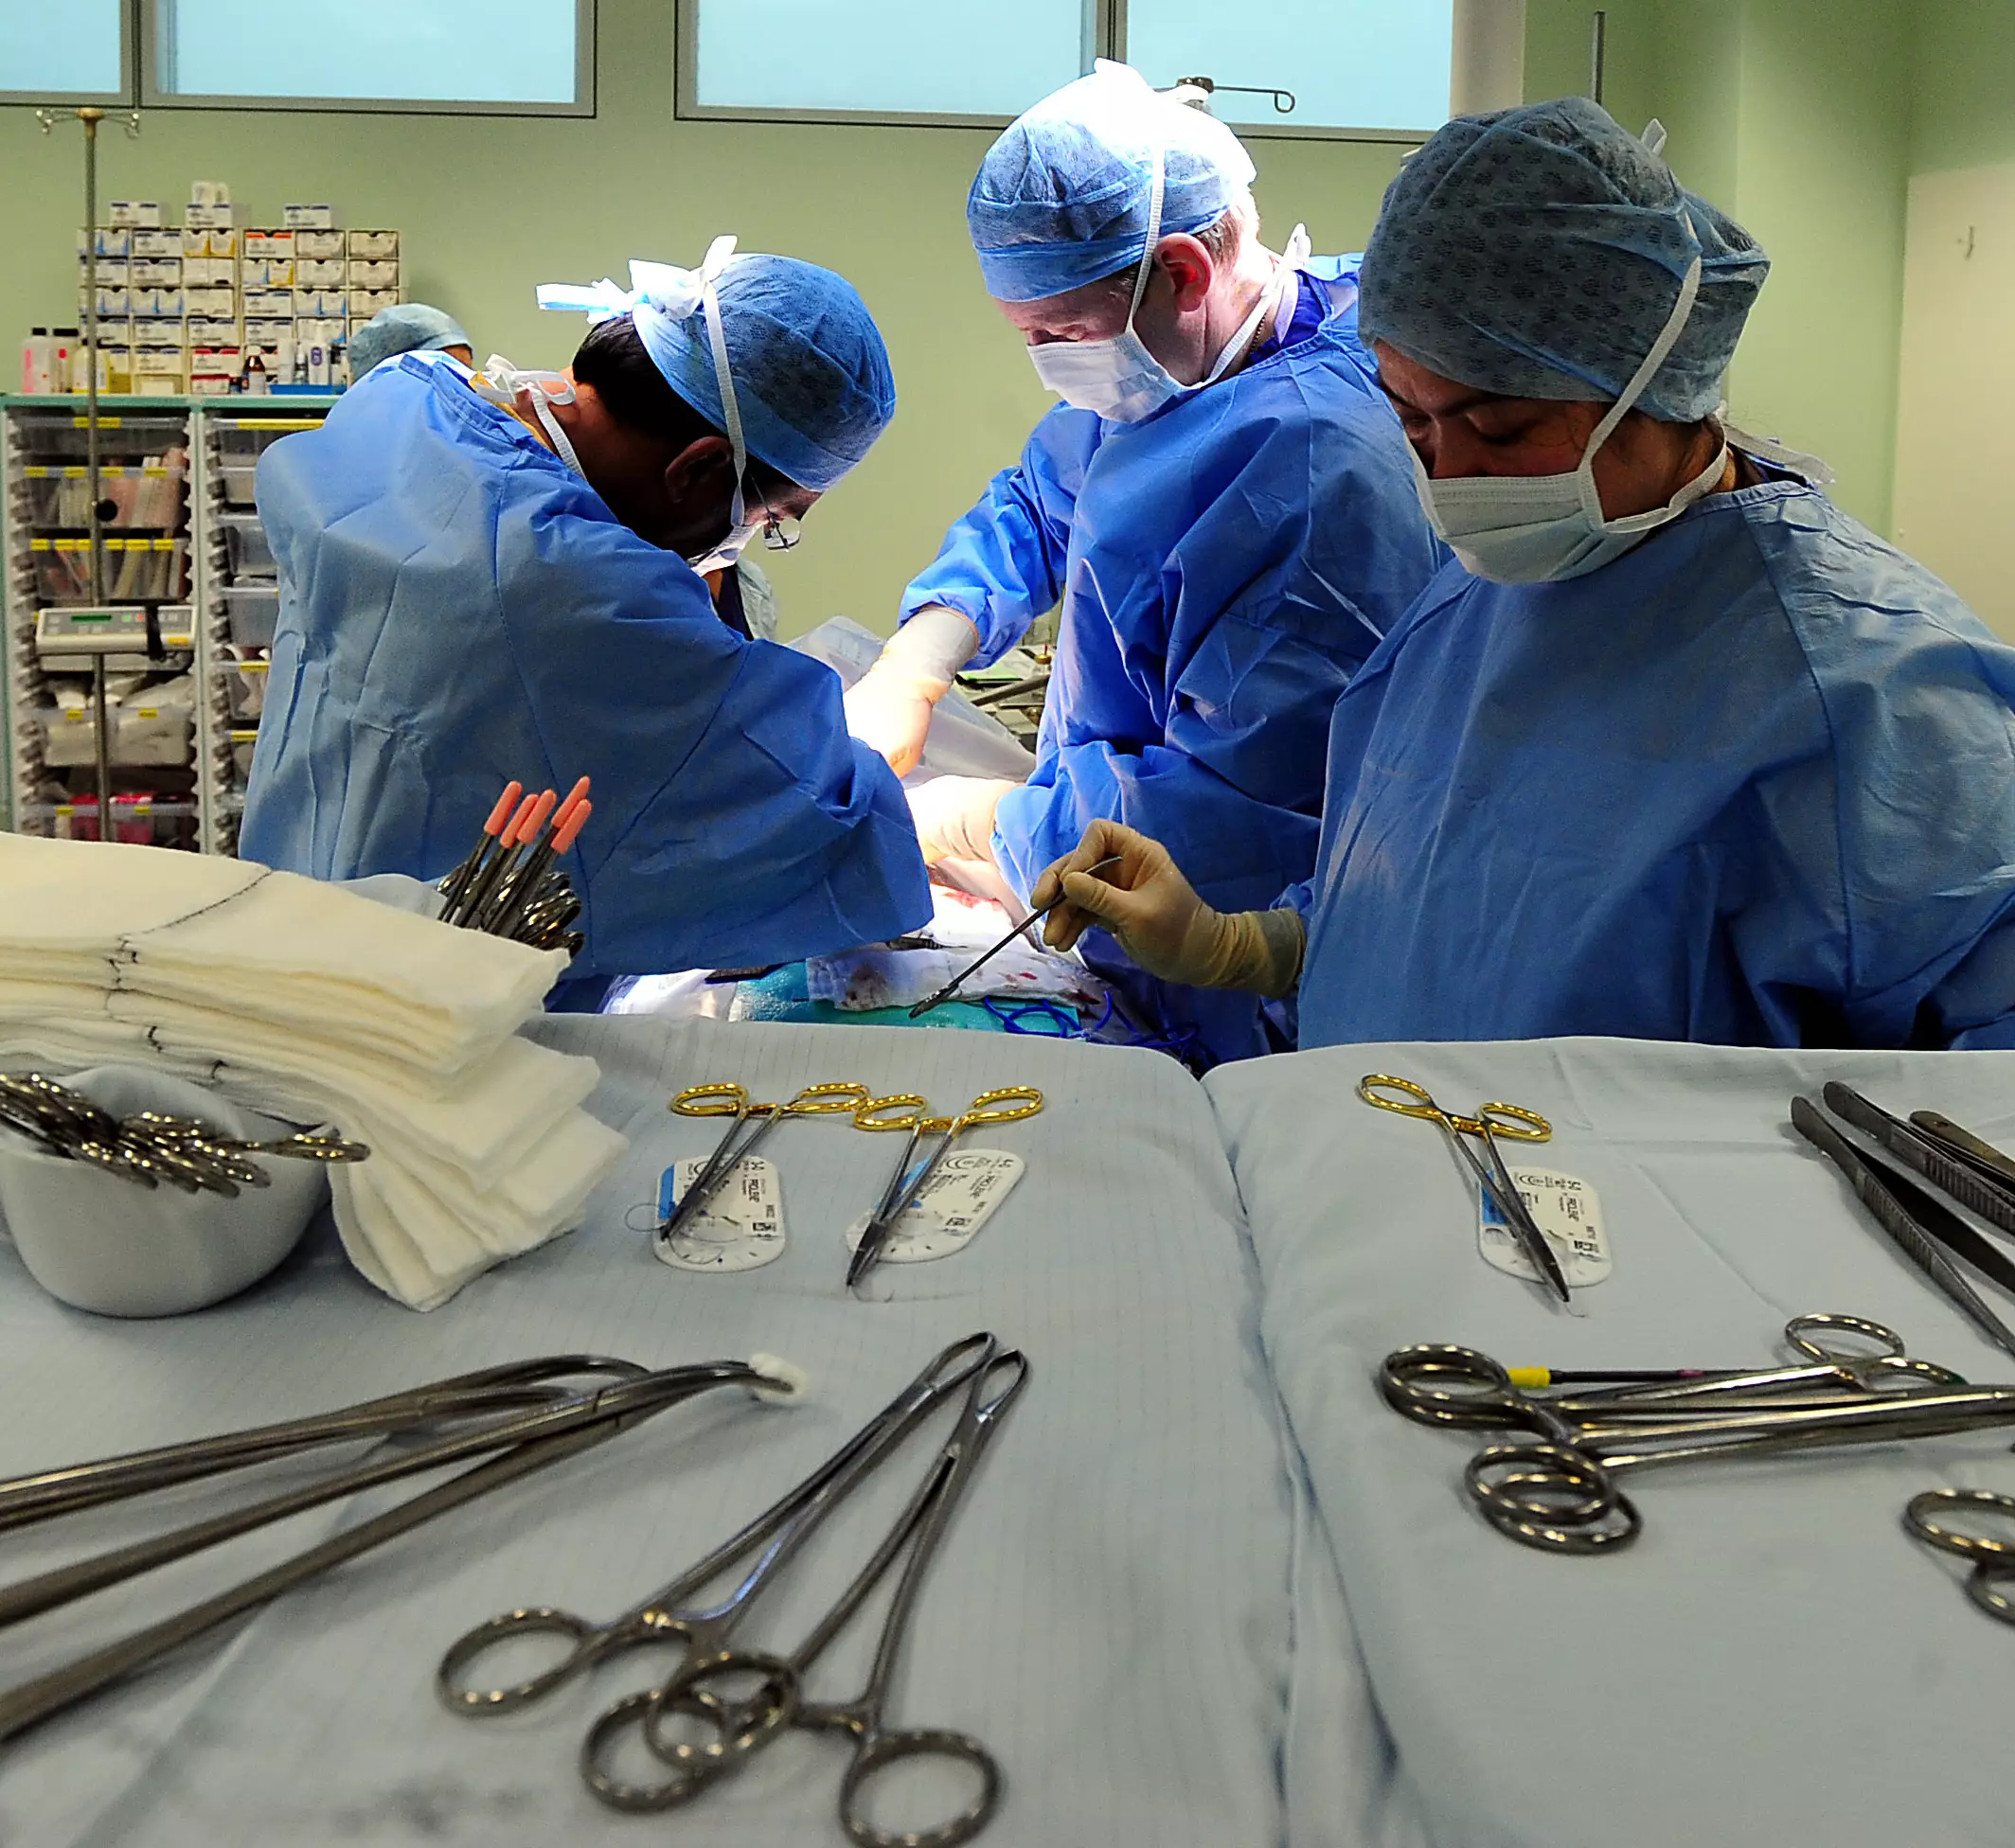 (Stock Image) Surgeons were able to reattach the penis during a seven-hour operation.